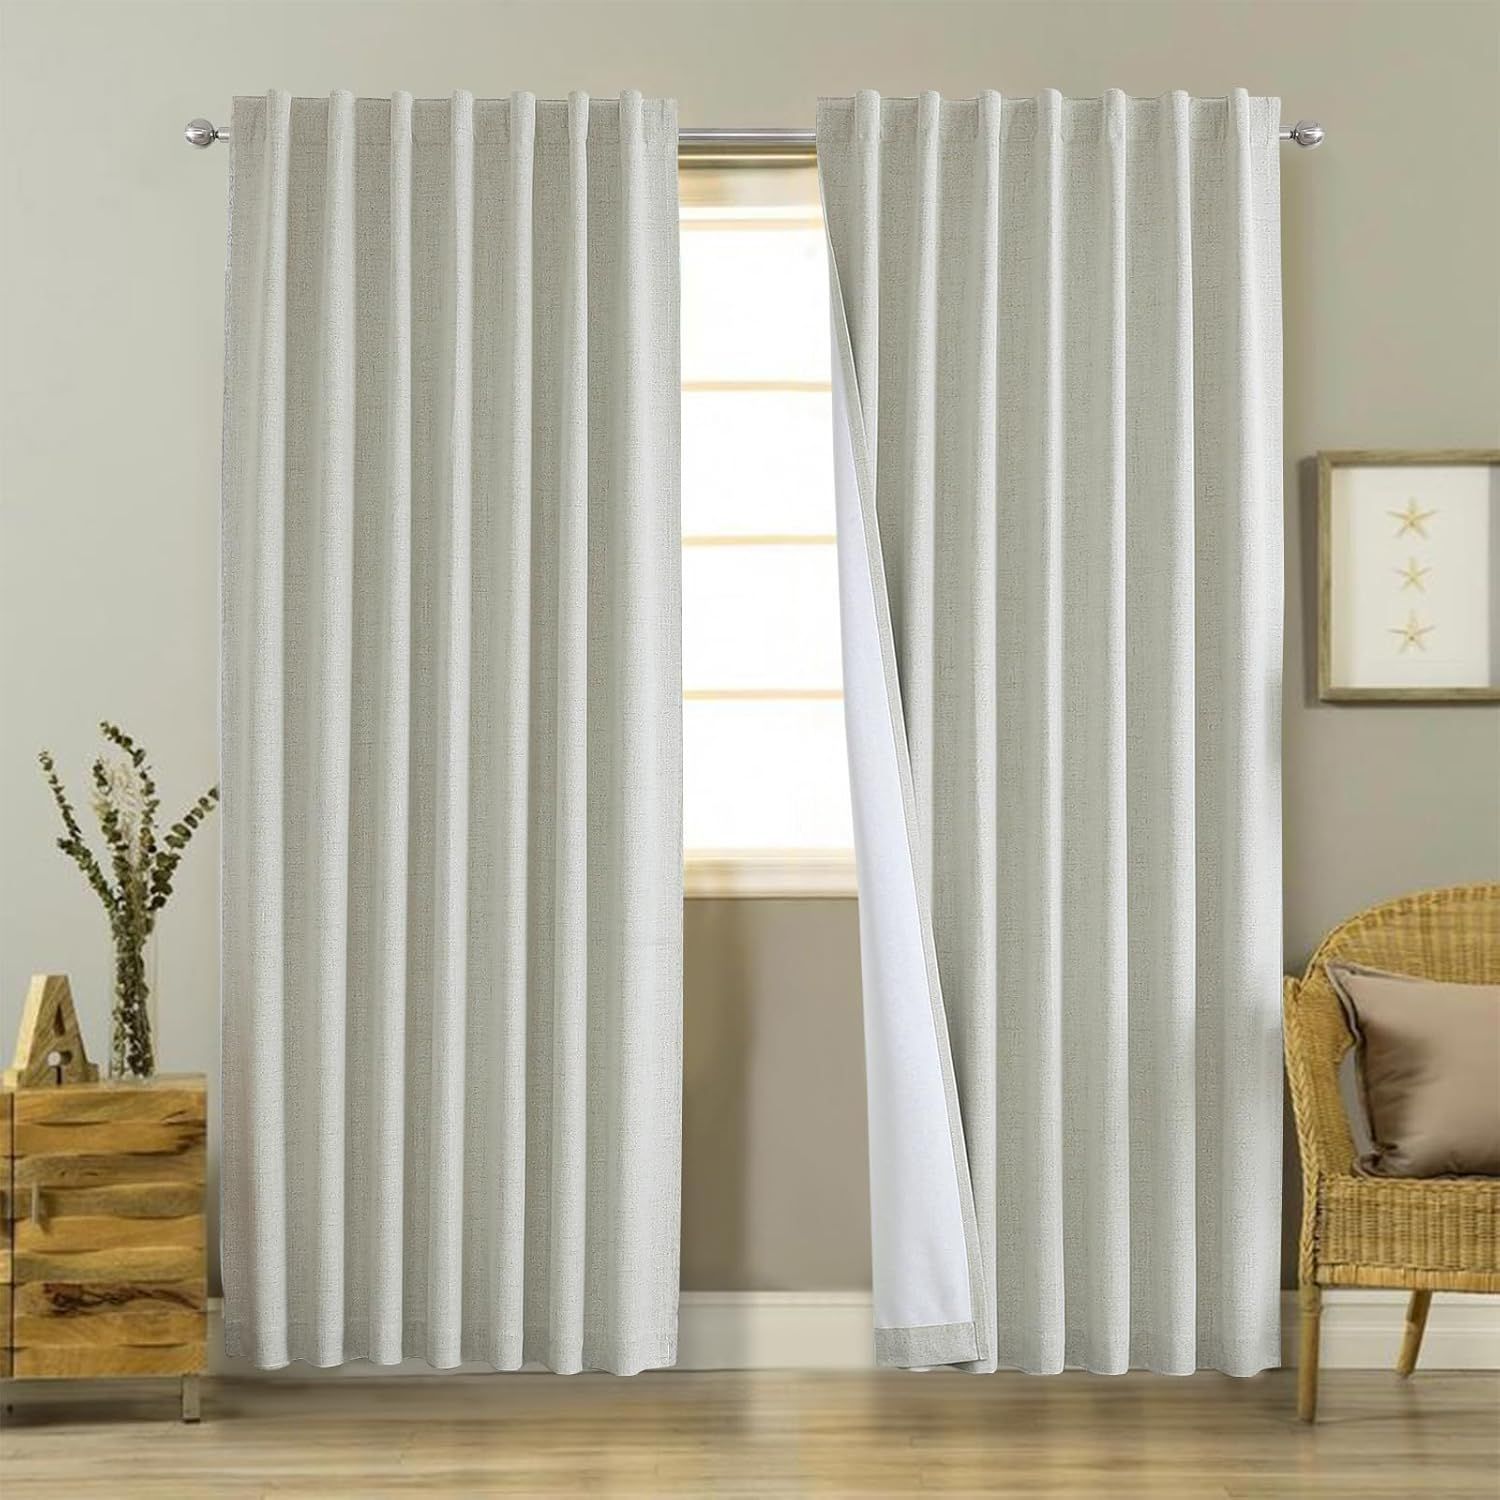 Joydeco Linen Curtains 96 inches Long 100% Blackout Drapes 95 inch Length 2 Panels Set for Bedroo... | Amazon (CA)